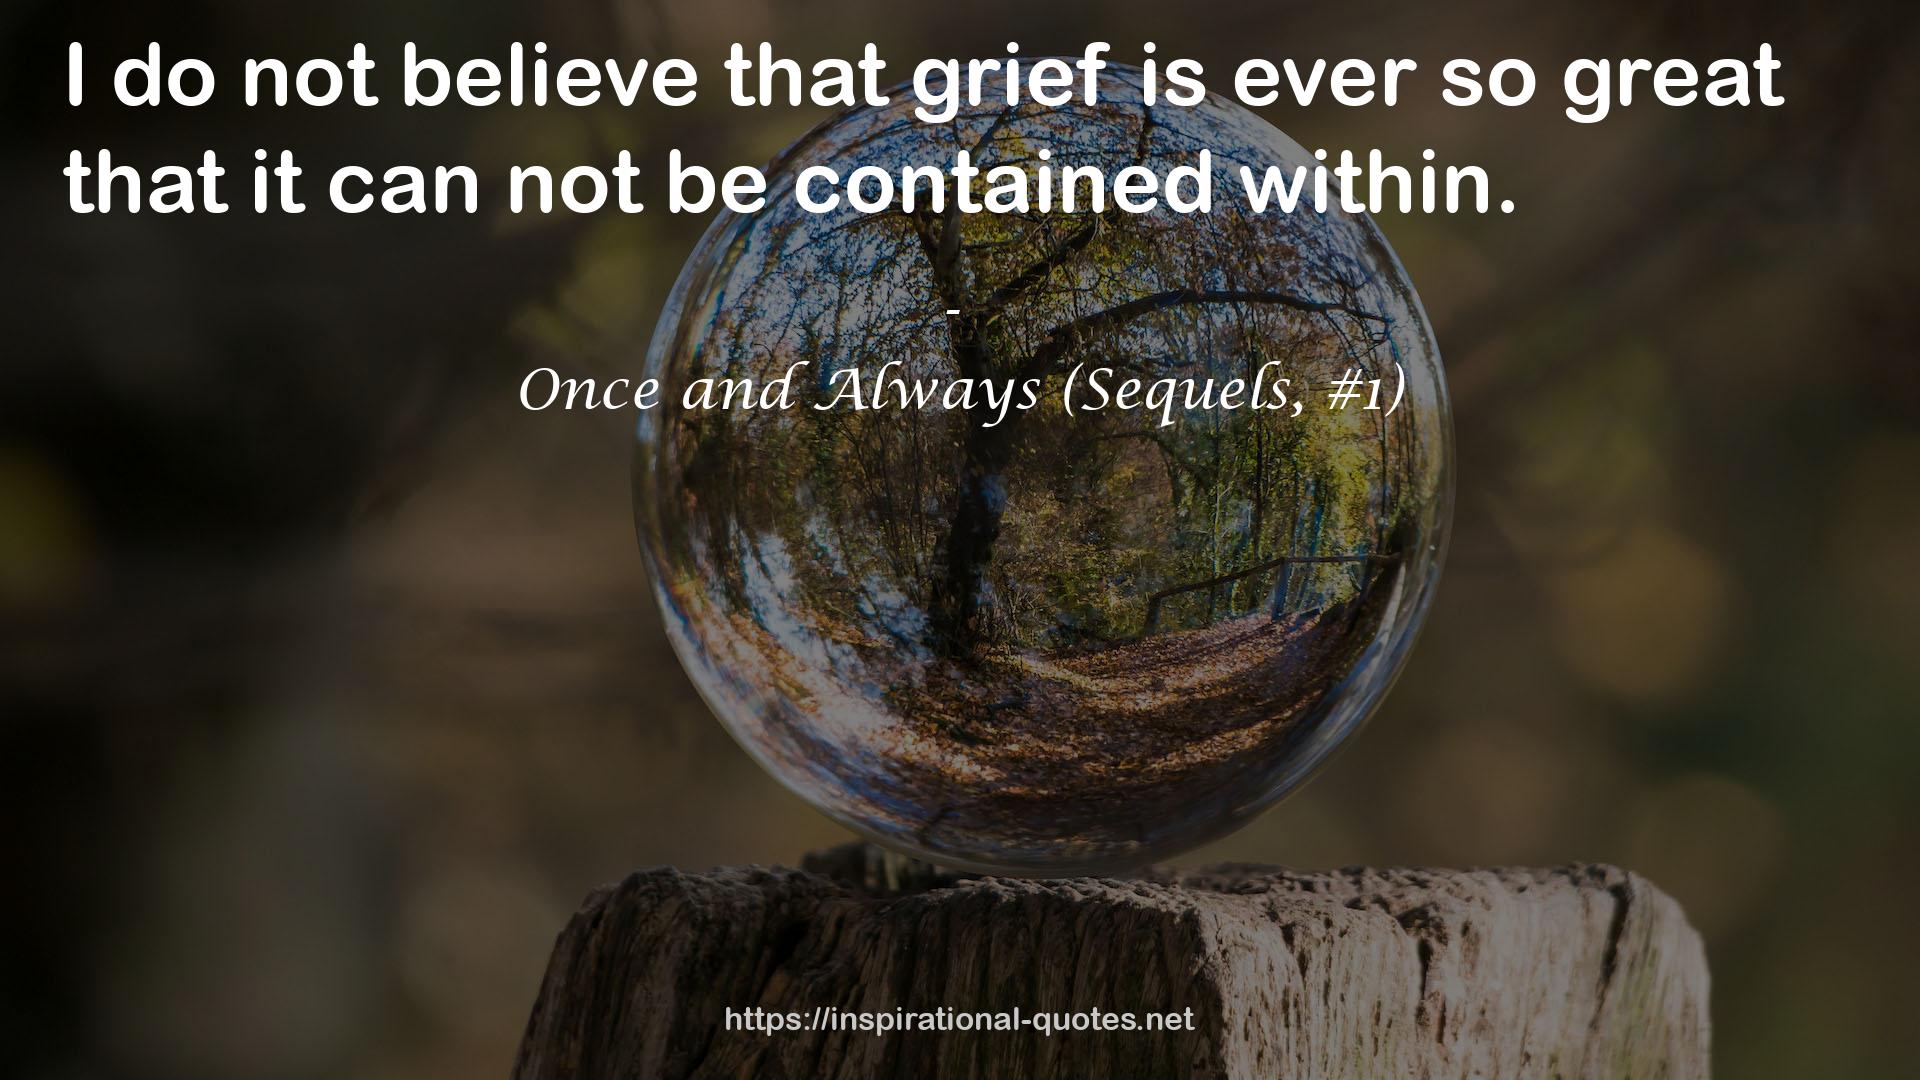 Once and Always (Sequels, #1) QUOTES